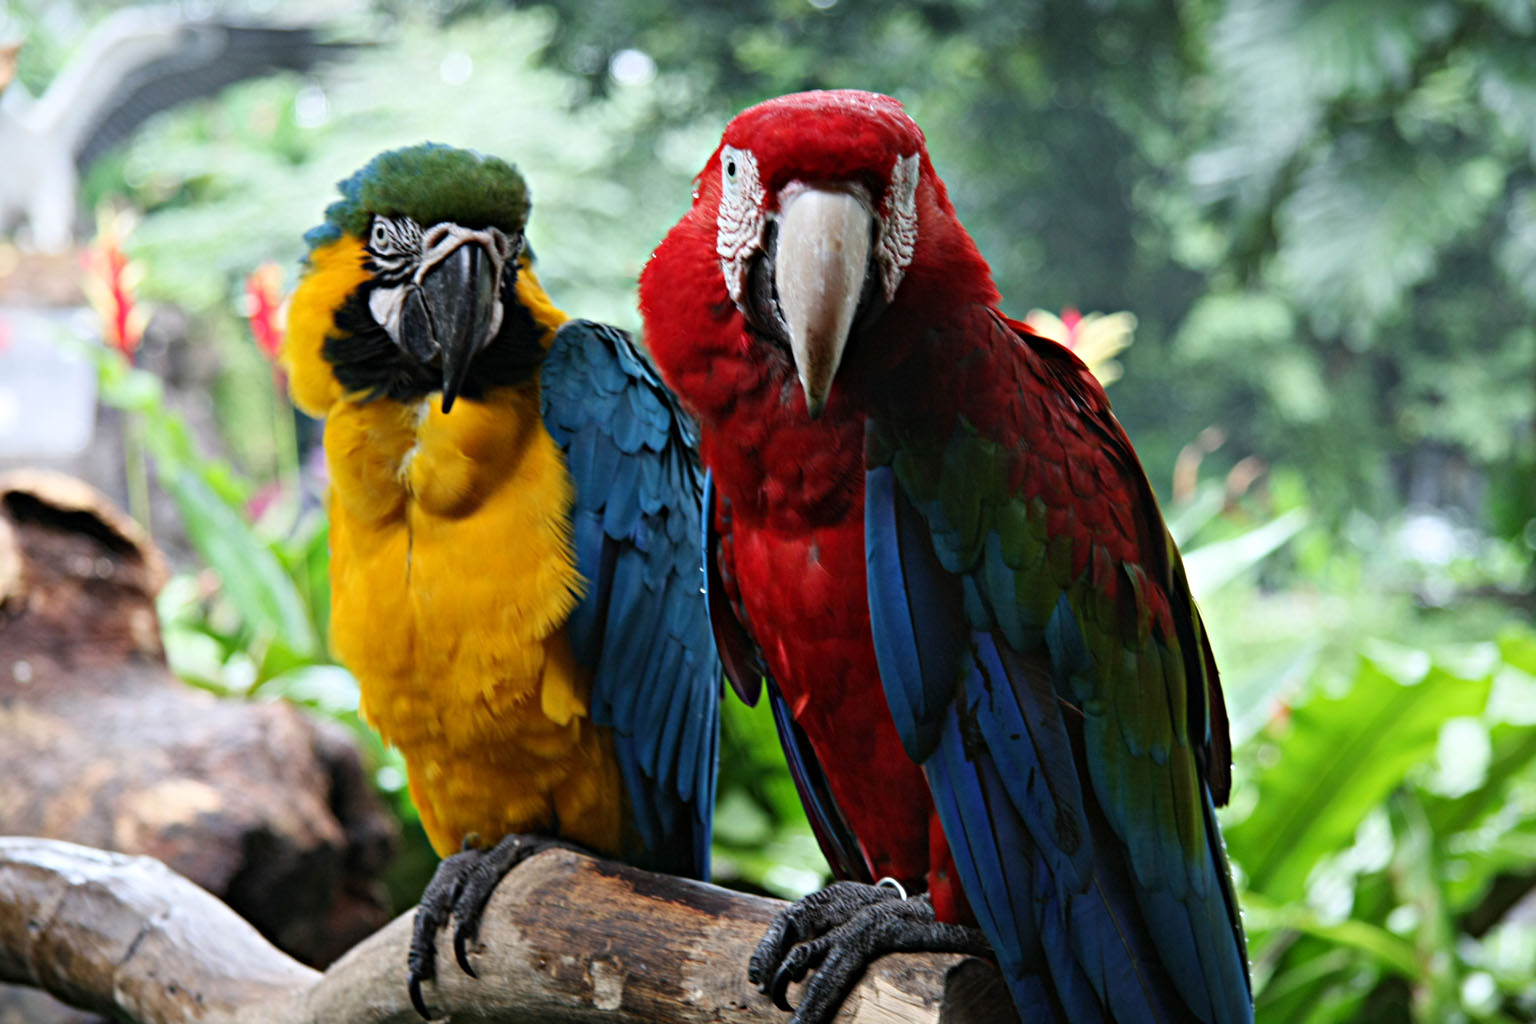 HD WALLPAPER For Pc and Mobile : Colour full Parrot Birds